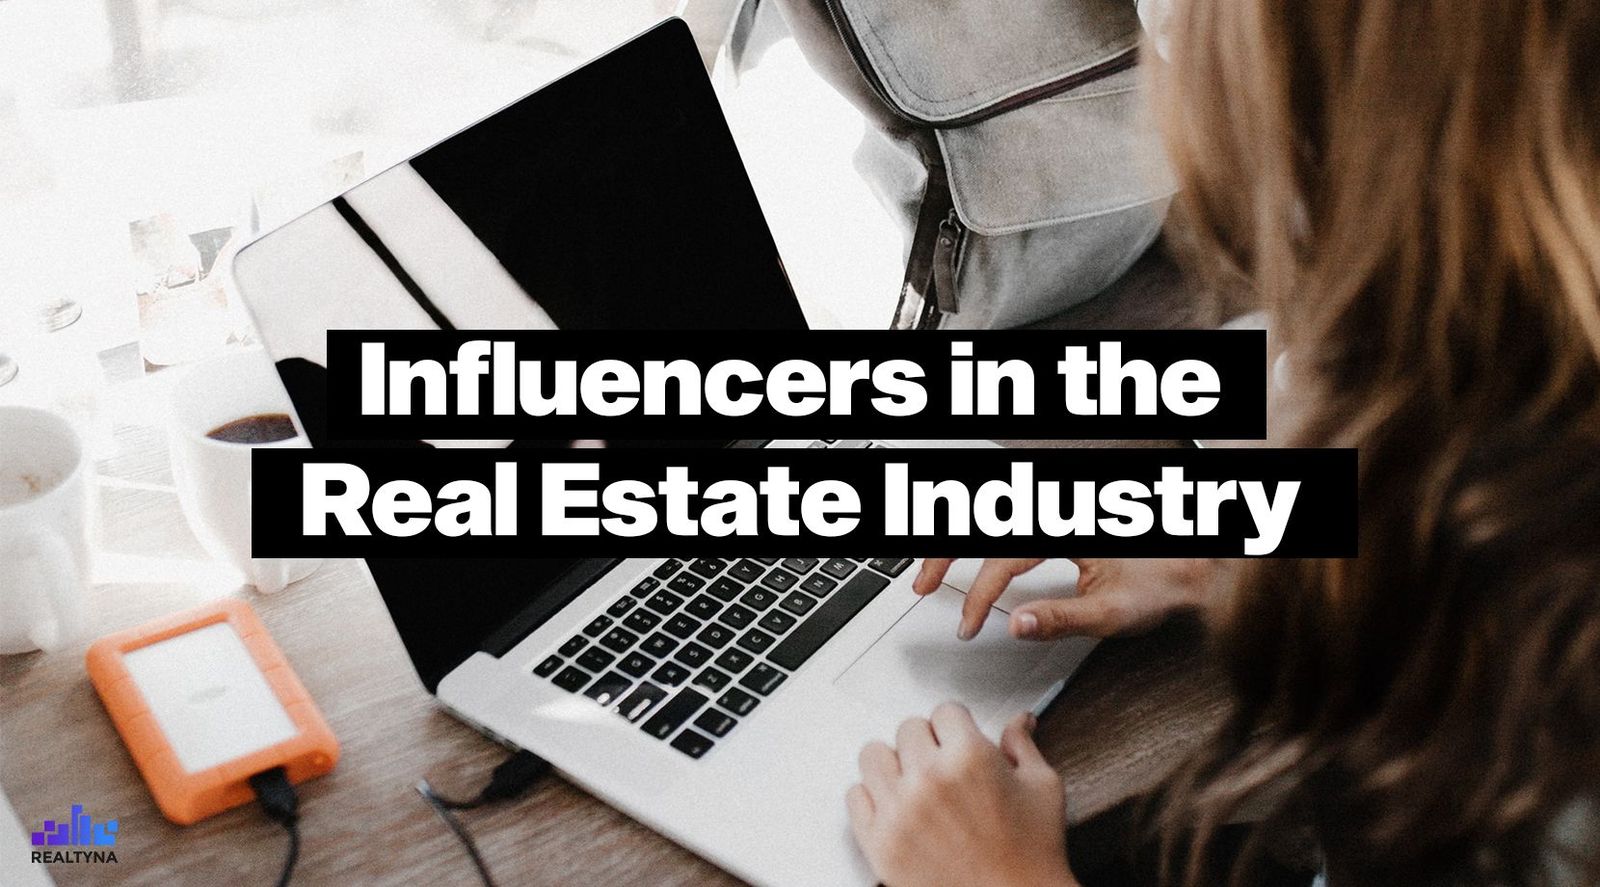 Influencers in the Real Estate Industry